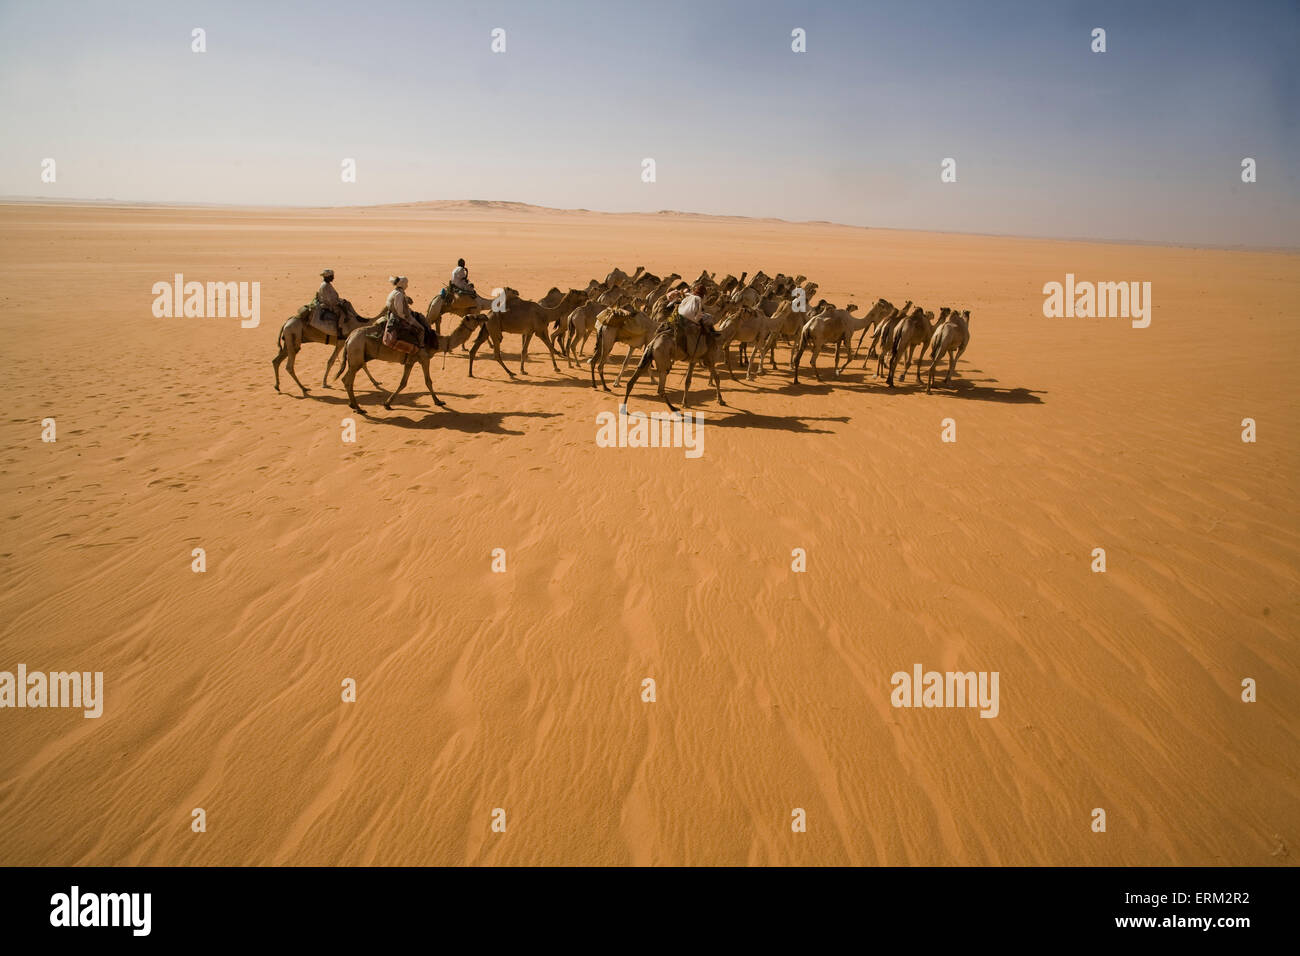 A camel caravan travels through the Sahara Desert, Sudan.150,000 camels travel from Sudanto Egypt yearly to be sold. Stock Photo